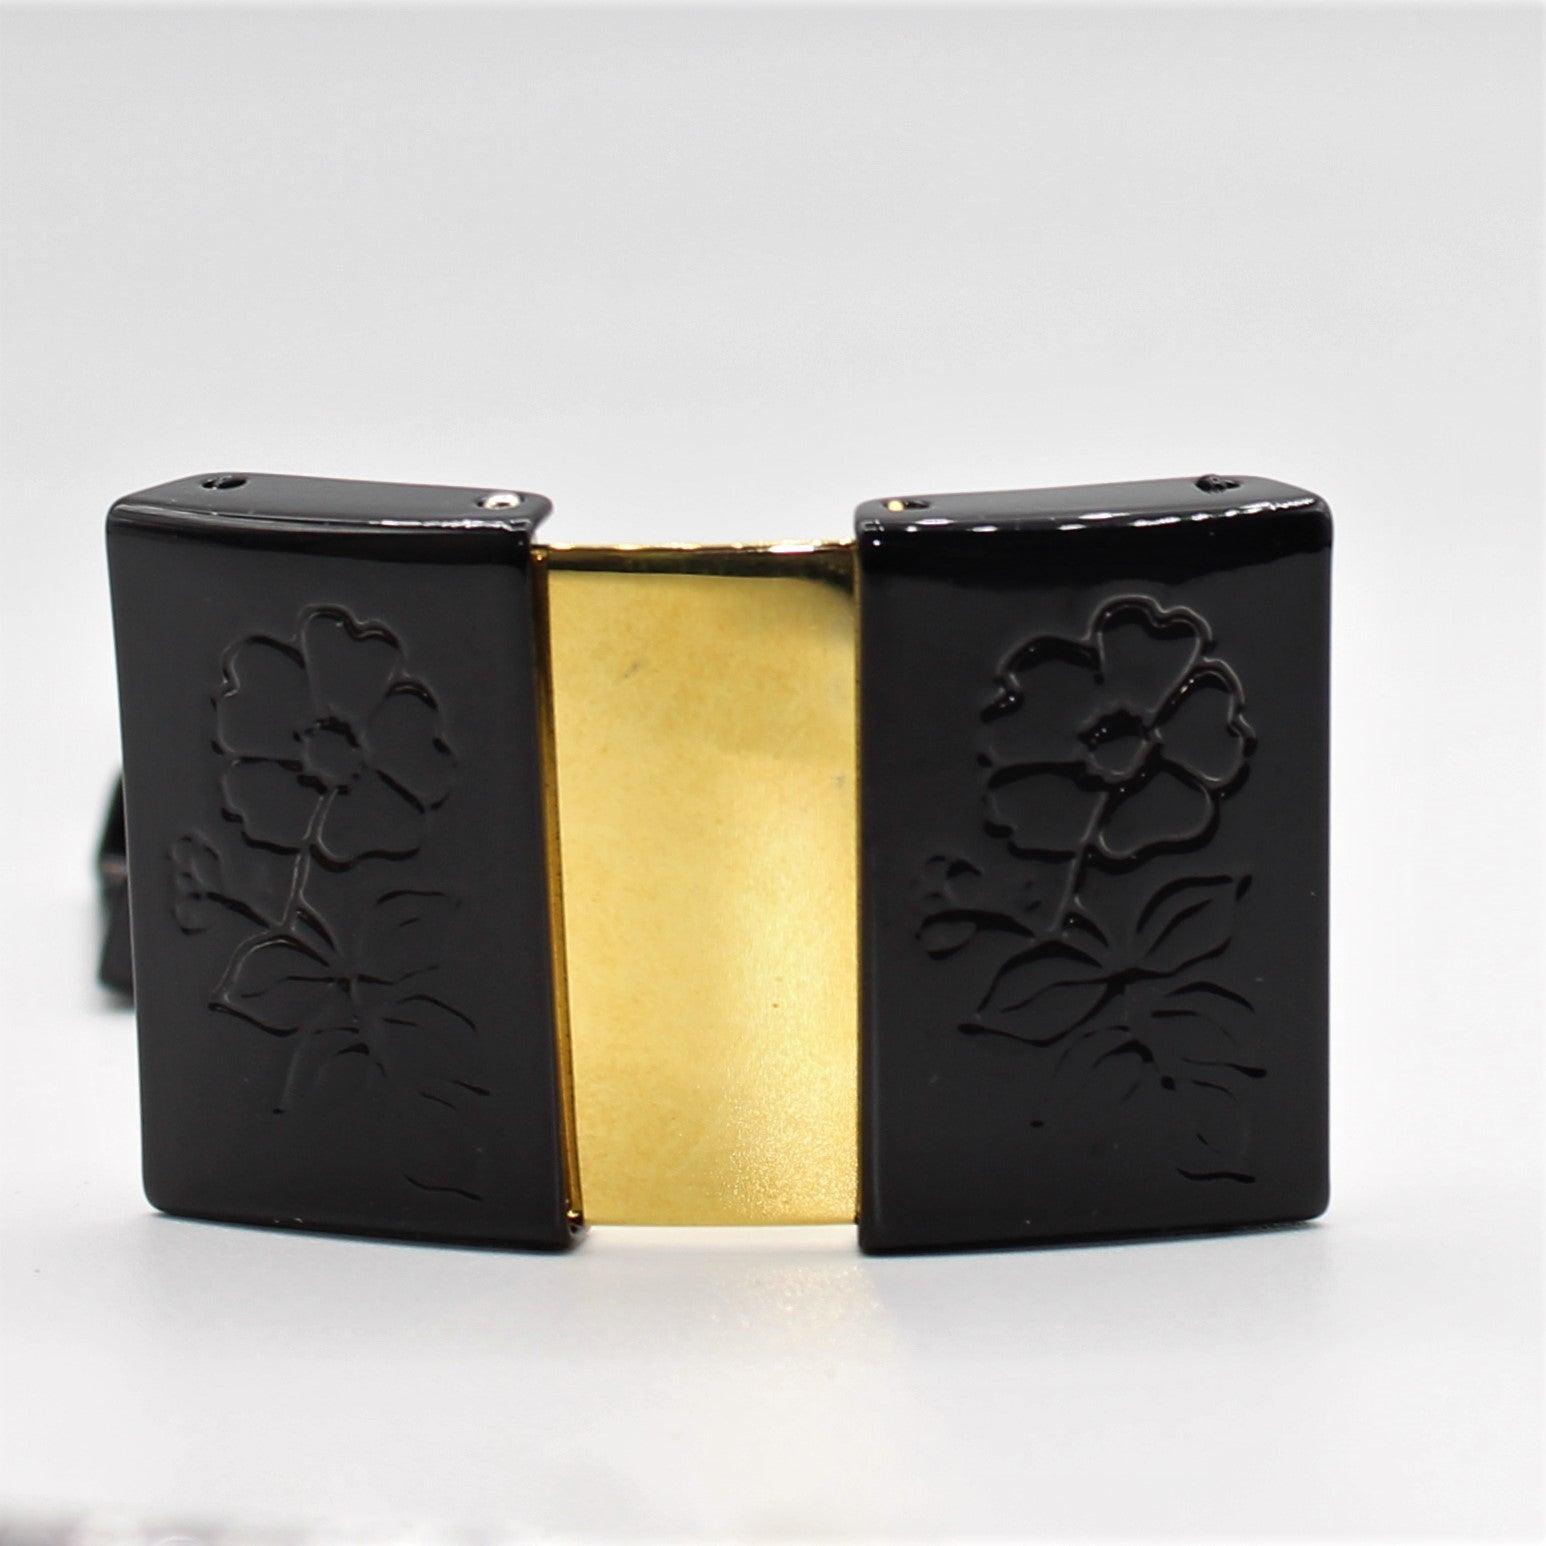 2 Set of Gold and Black Belt Buckle with Flower Pattern 43x24 mm - ACCESSOIRES LEDUC